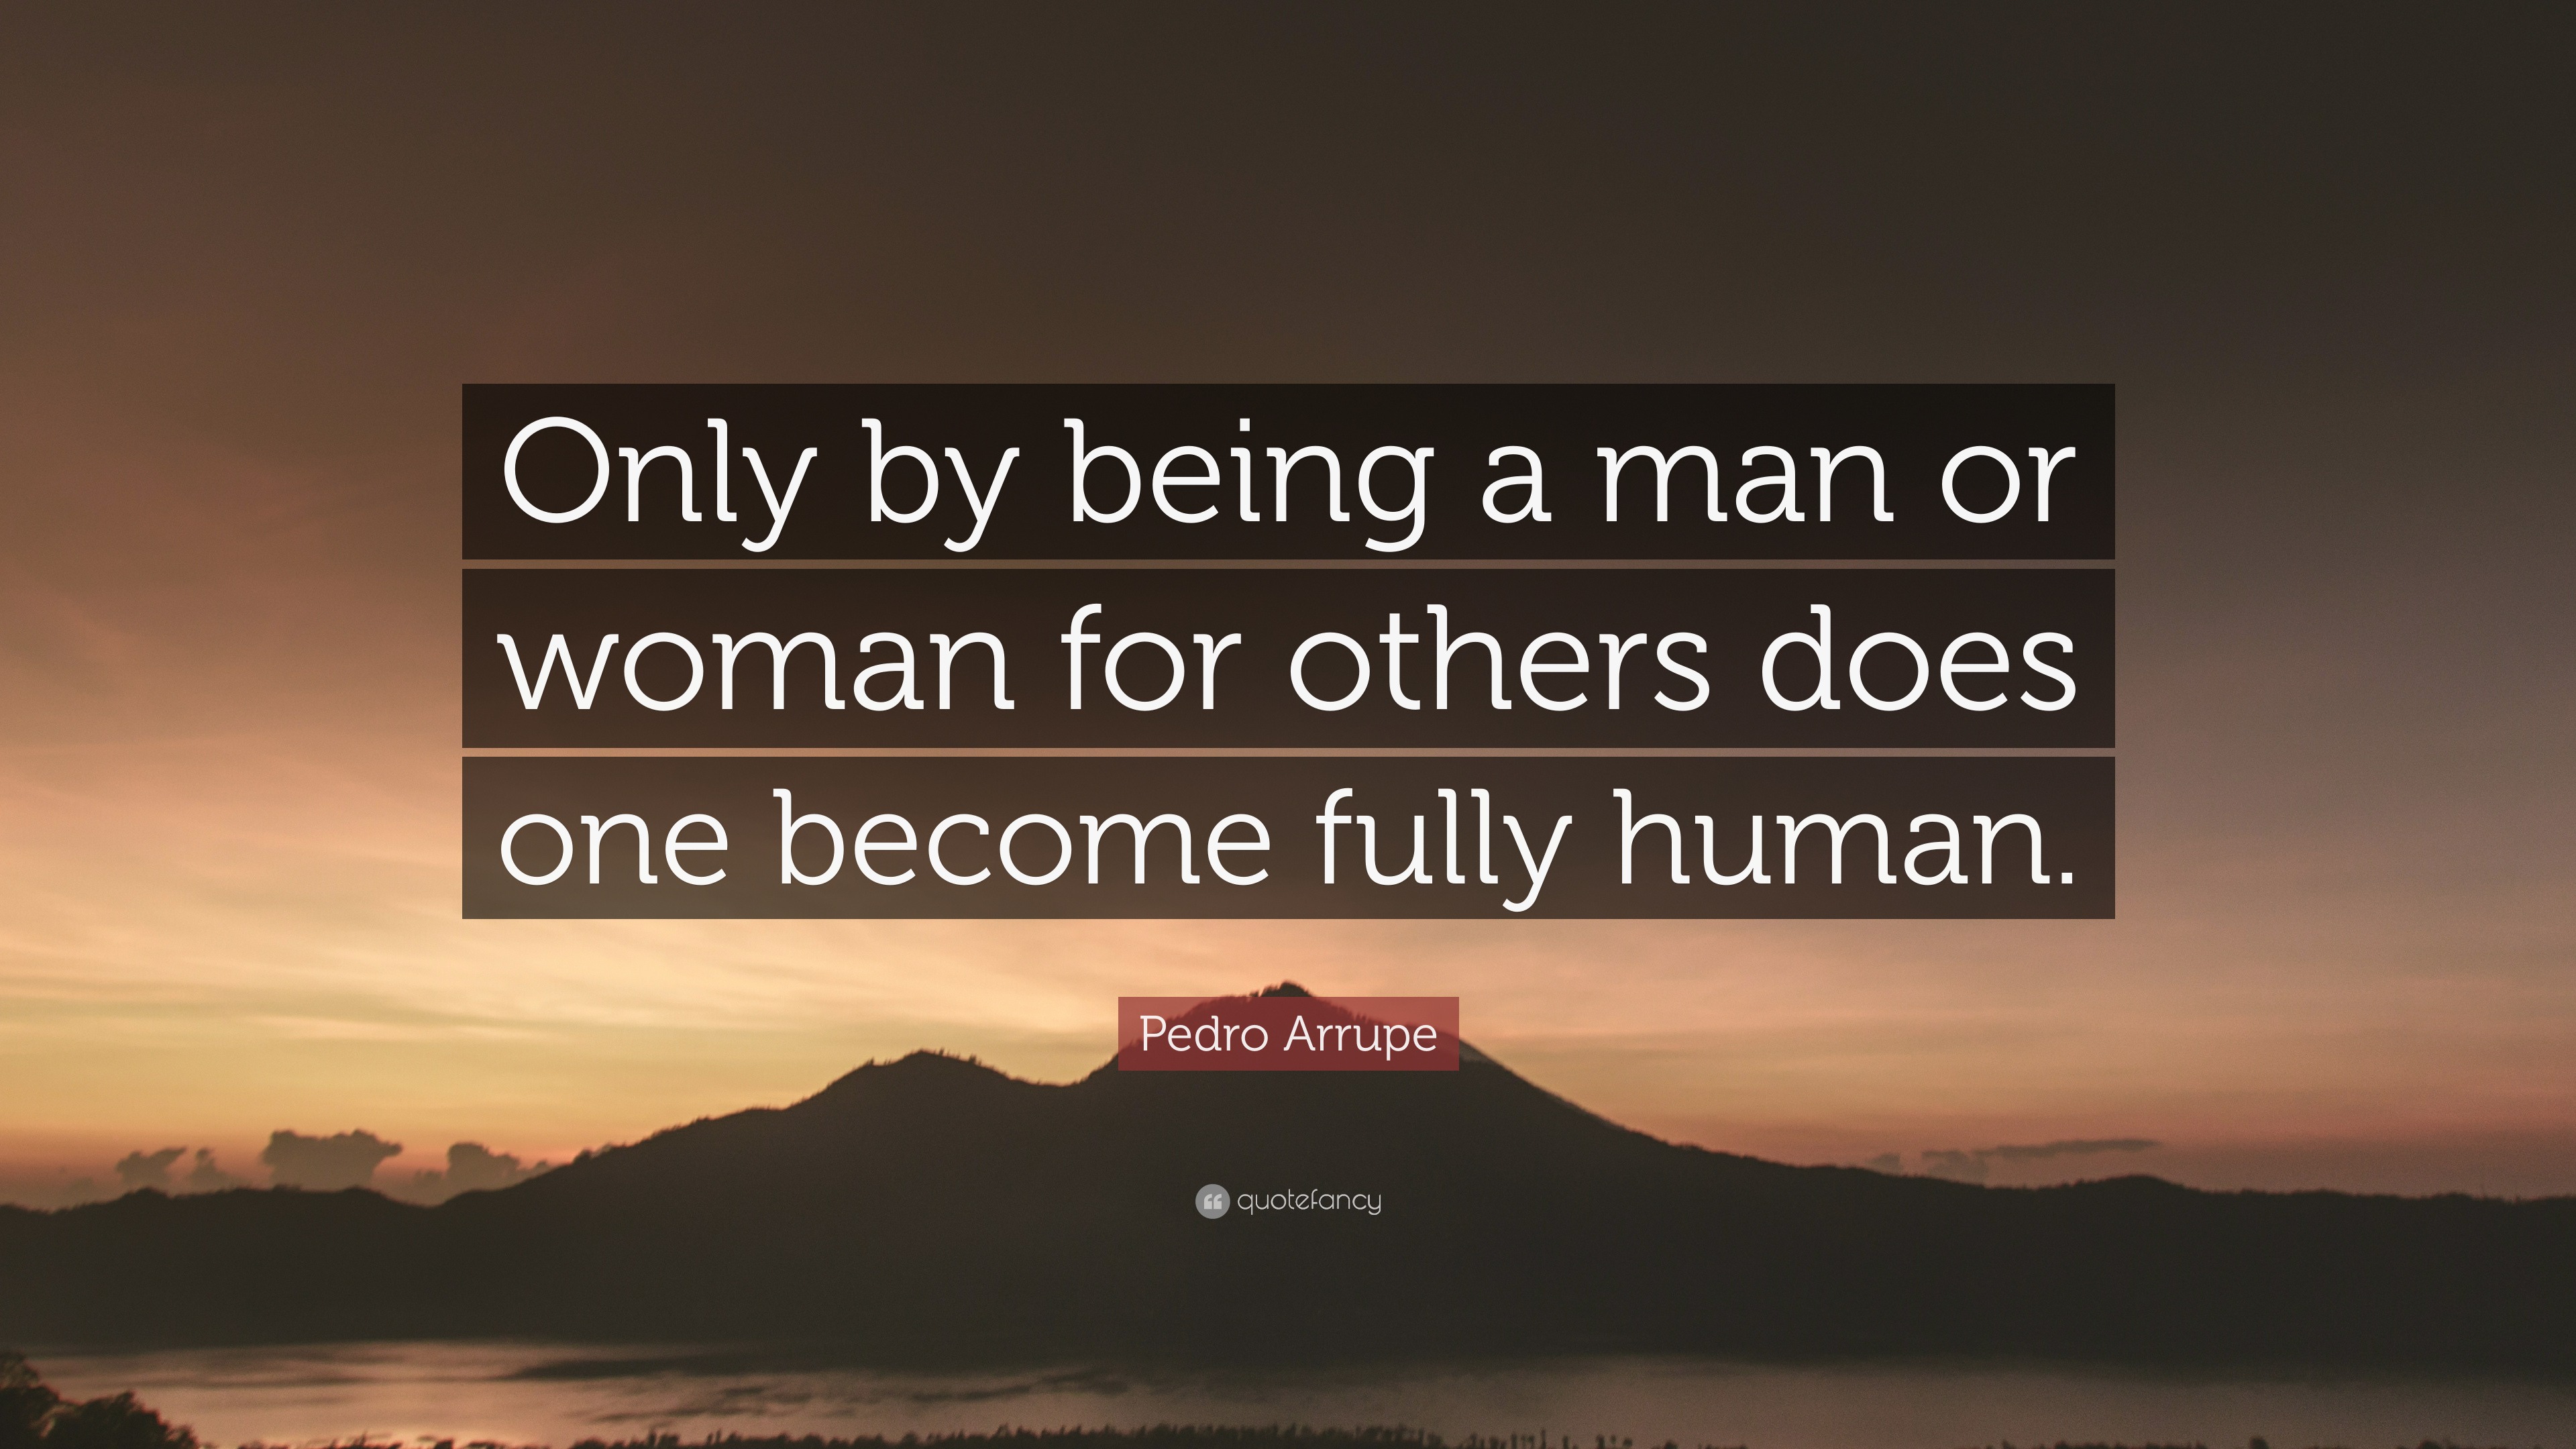 Pedro Arrupe Quote: “Only by being a man or woman for others does one